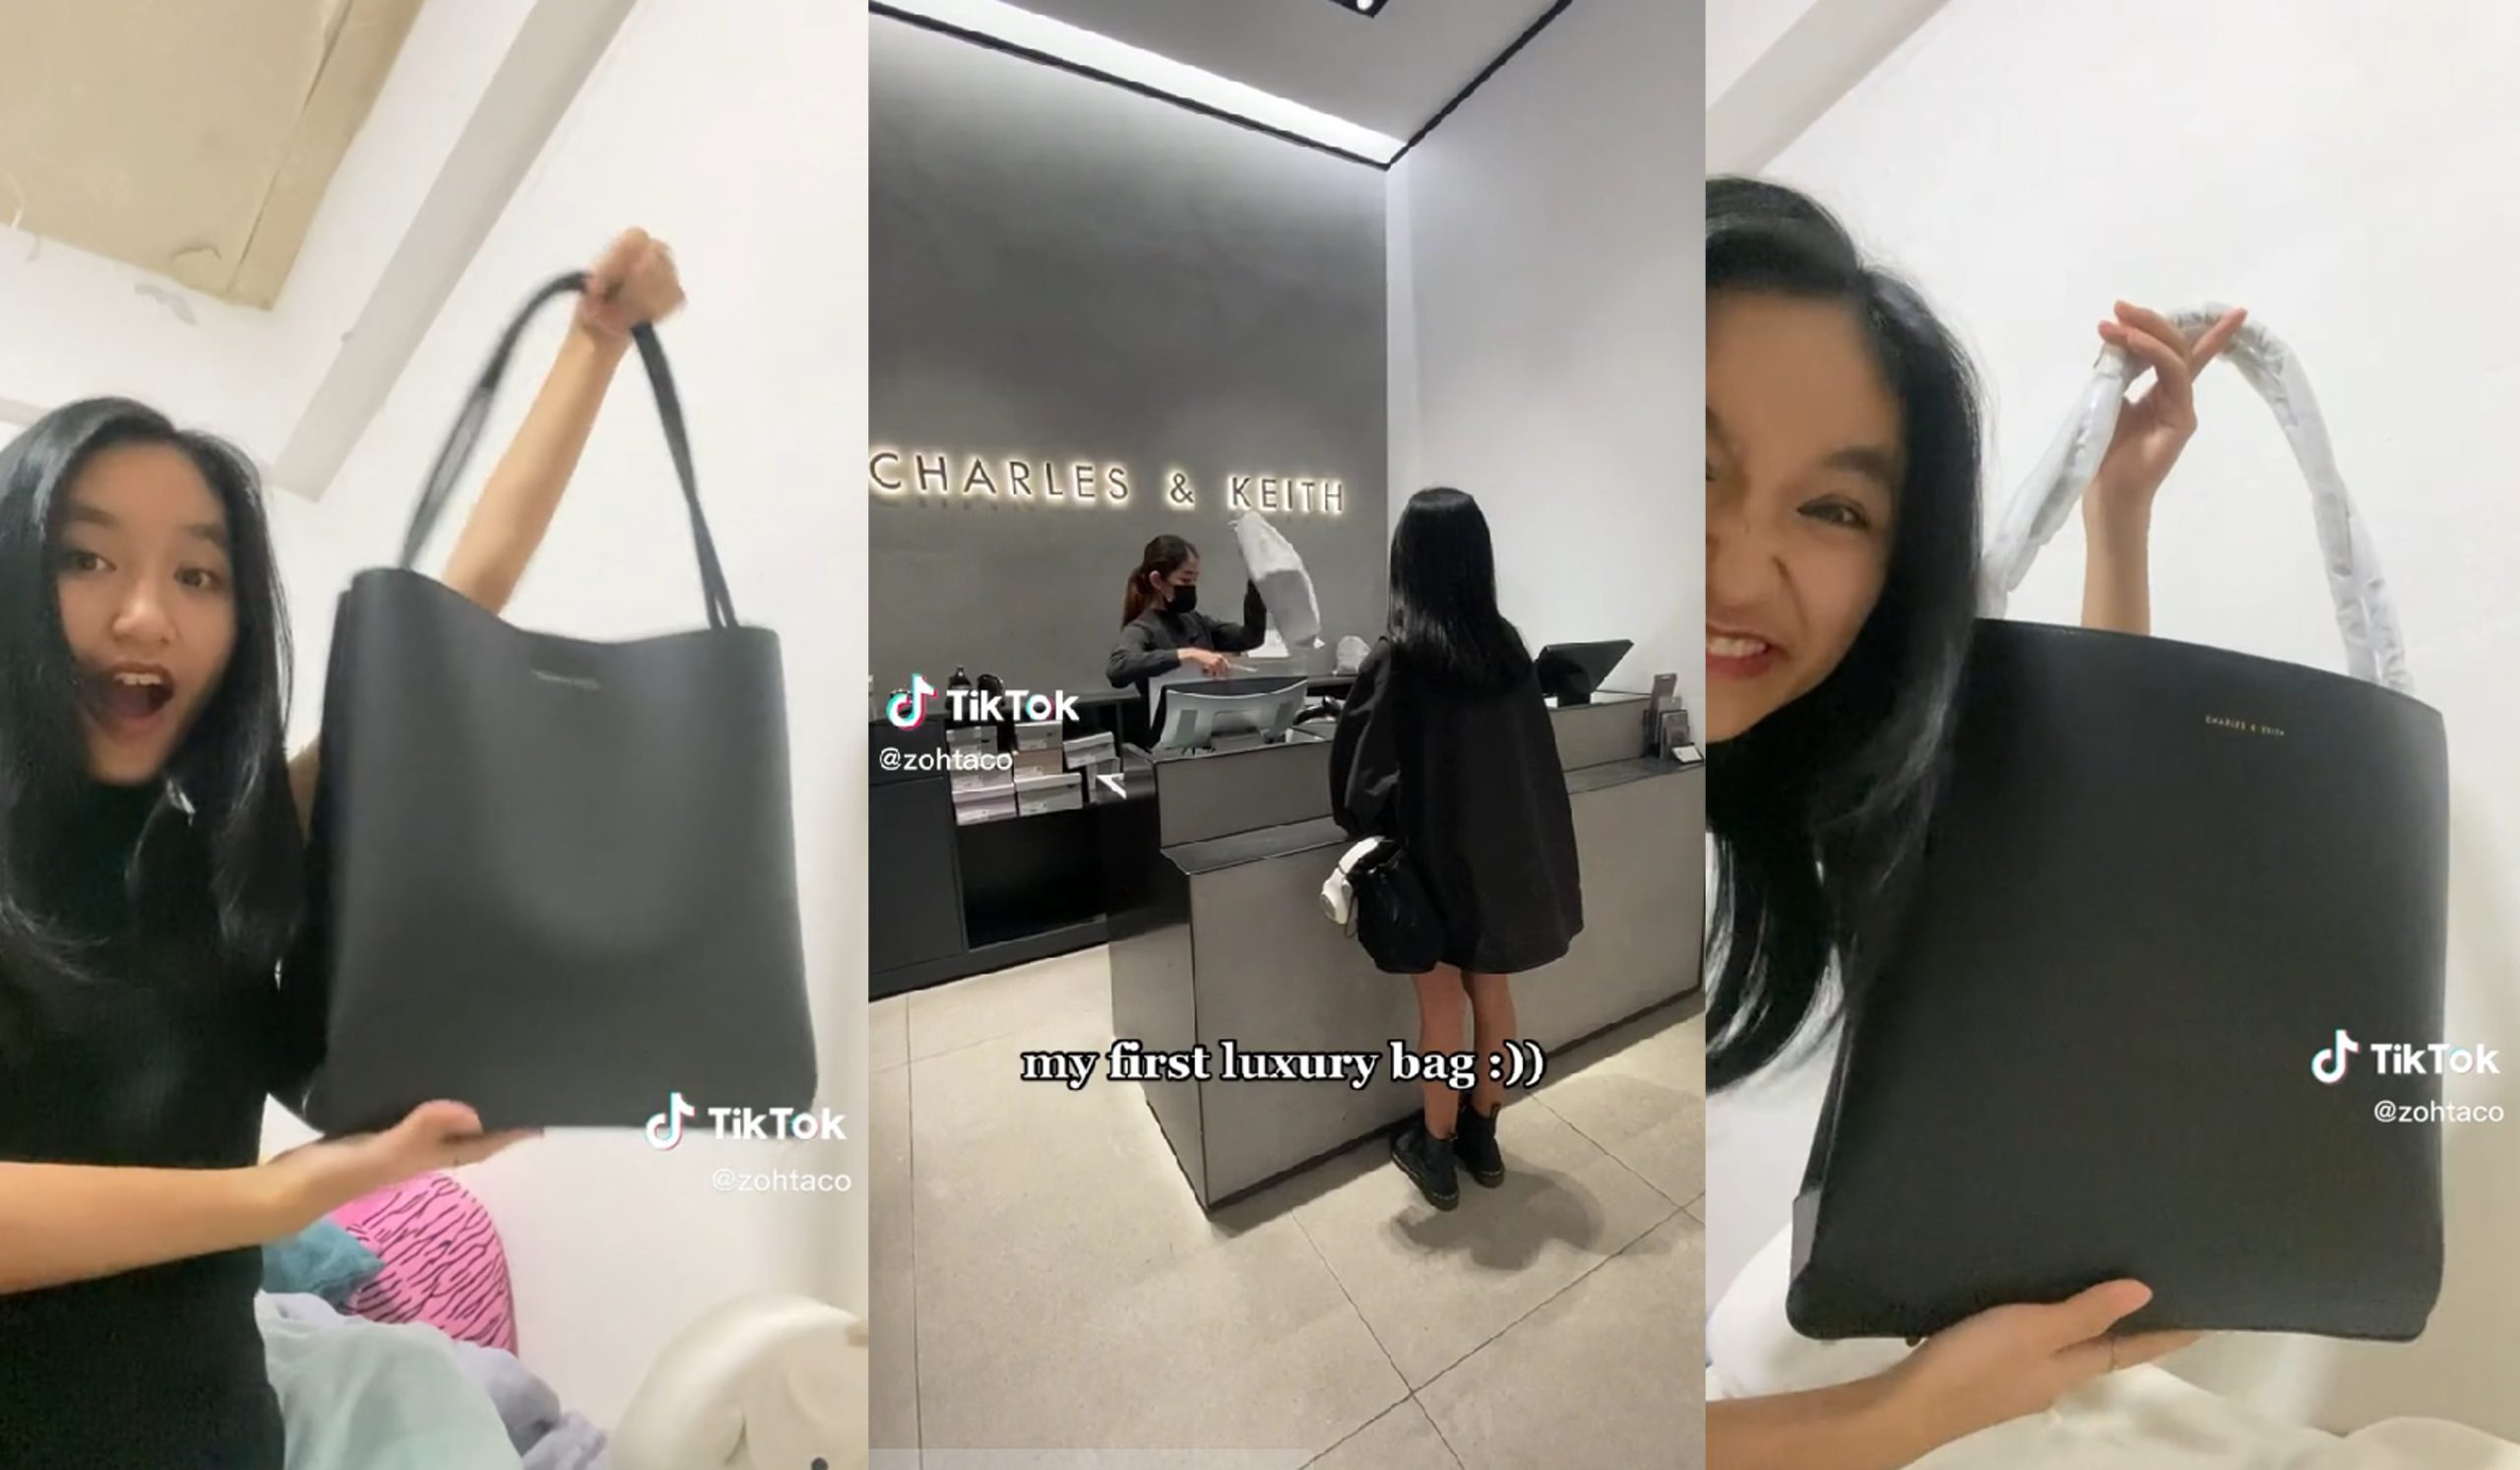 Pinay Teen Meets Charles and Keith Founders & Receives Support